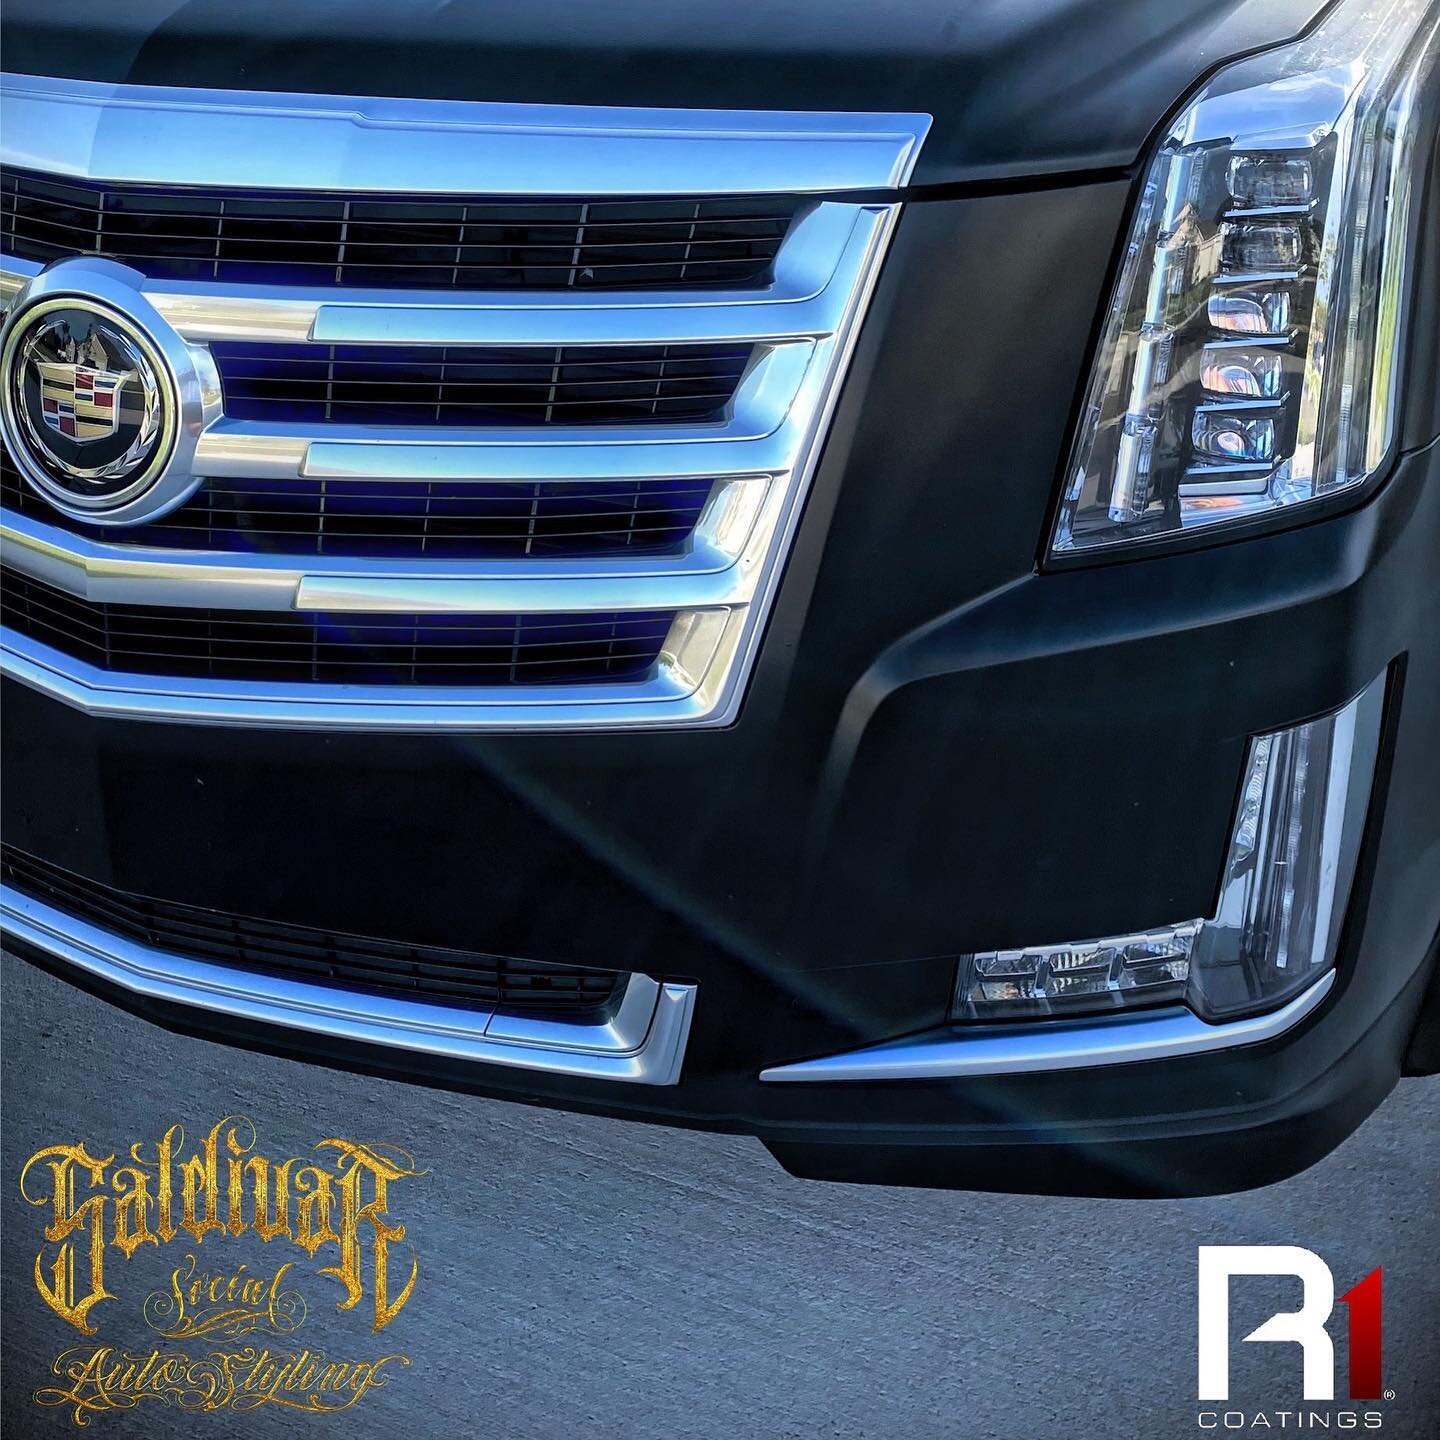 7yr protection on the Escalade headlights by using @r1coatings Pro Ceramic coating ~When you want to &ldquo;ROCK WITH THE BEST&rdquo;, Saldivar Social holds 5 Autostyling Certifications, trained by the same facility that trains Rolls Royce, Mercedes,